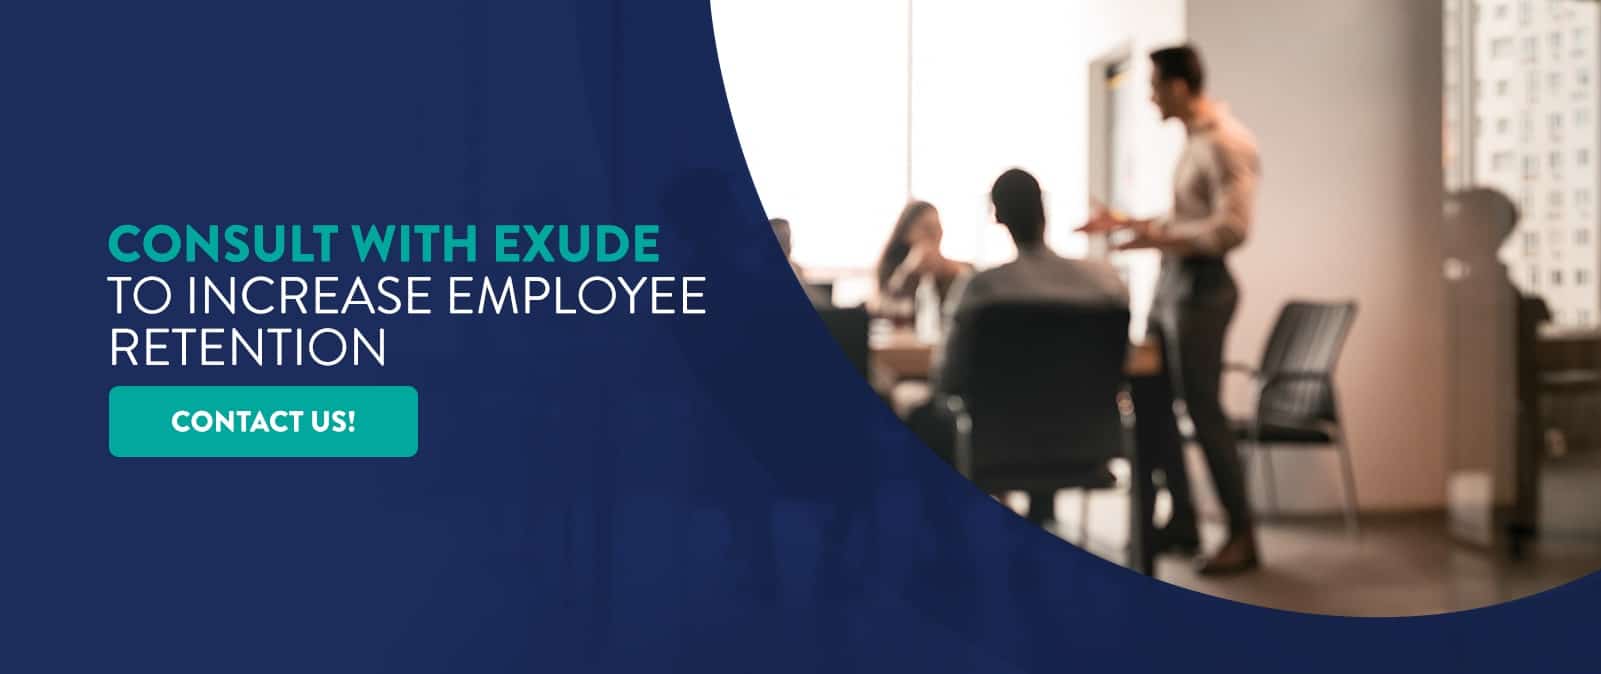 Consult with Exude to Increase Employee Retention